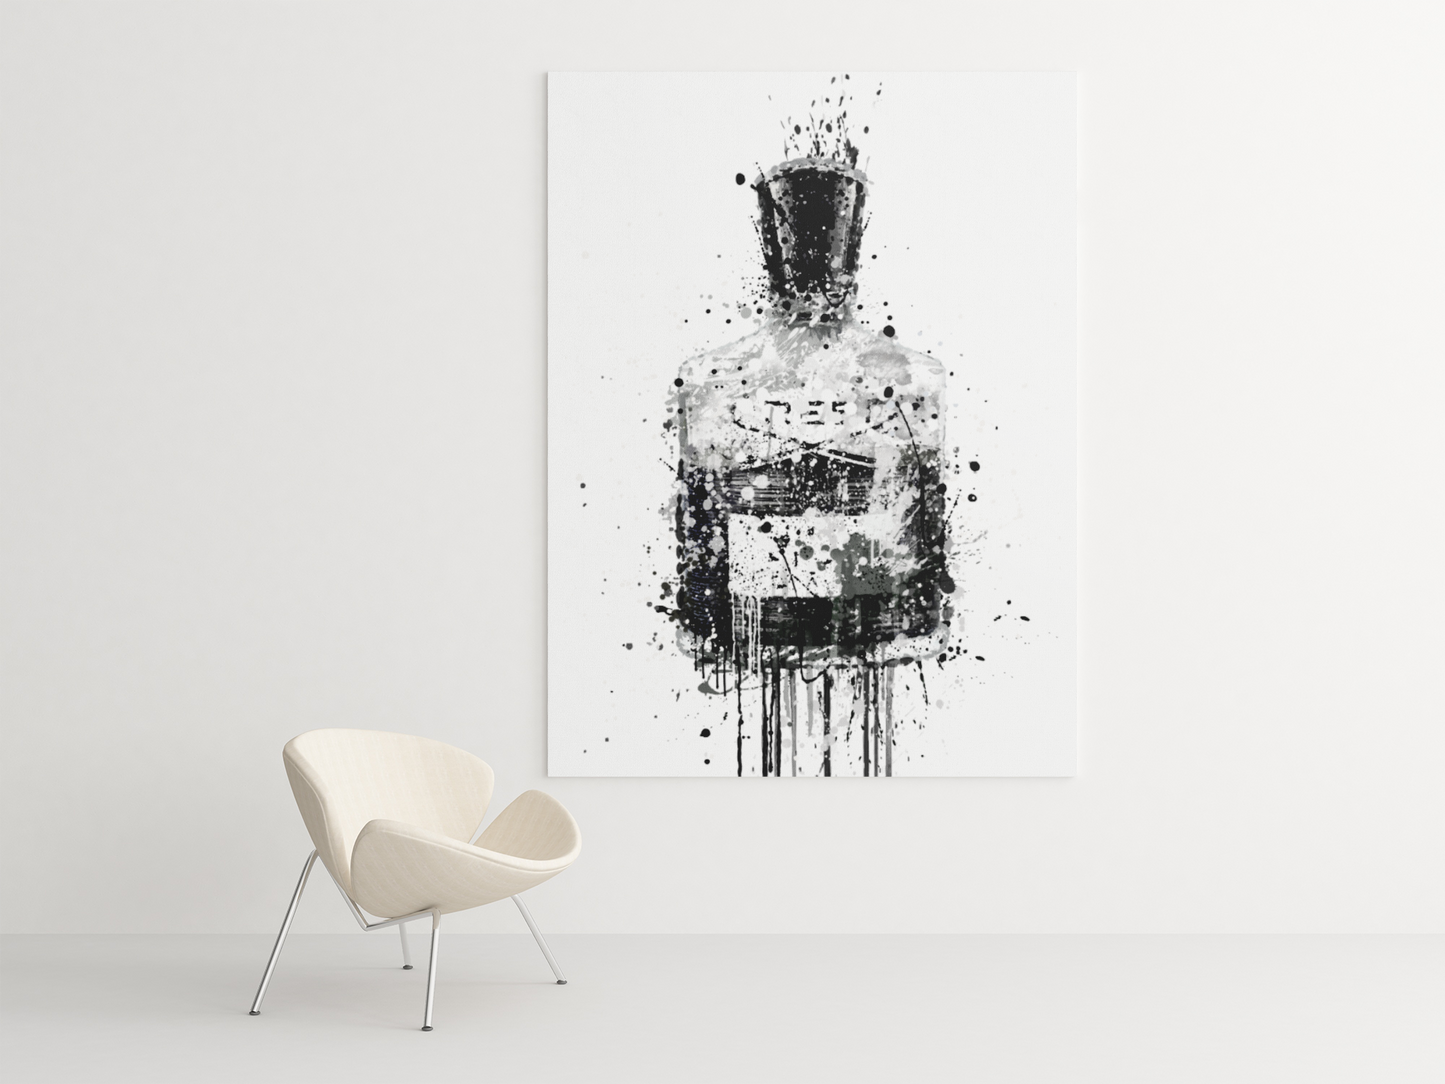 Belief Mens Aftershave Bottle Wall Art Print - available in different sizes